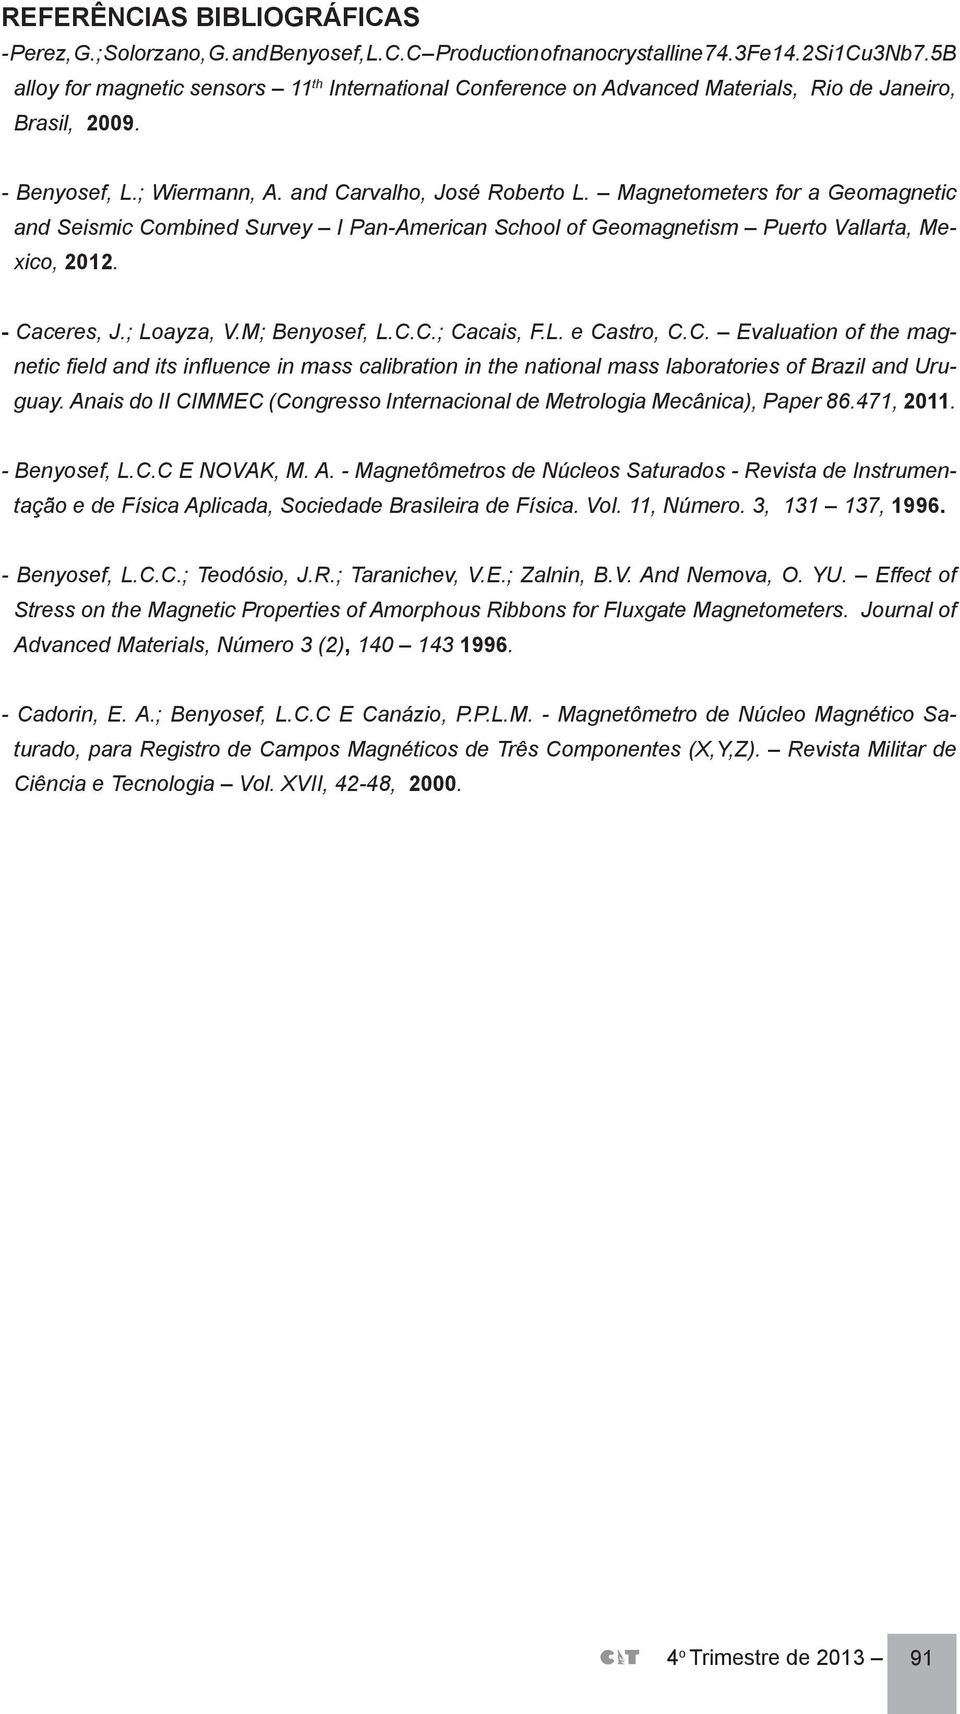 Magnetometers for a Geomagnetic and Seismic Combined Survey I Pan-American School of Geomagnetism Puerto Vallarta, Mexico, 2012. - Caceres, J.; Loayza, V.M; Benyosef, L.C.C.; Cacais, F.L. e Castro, C.